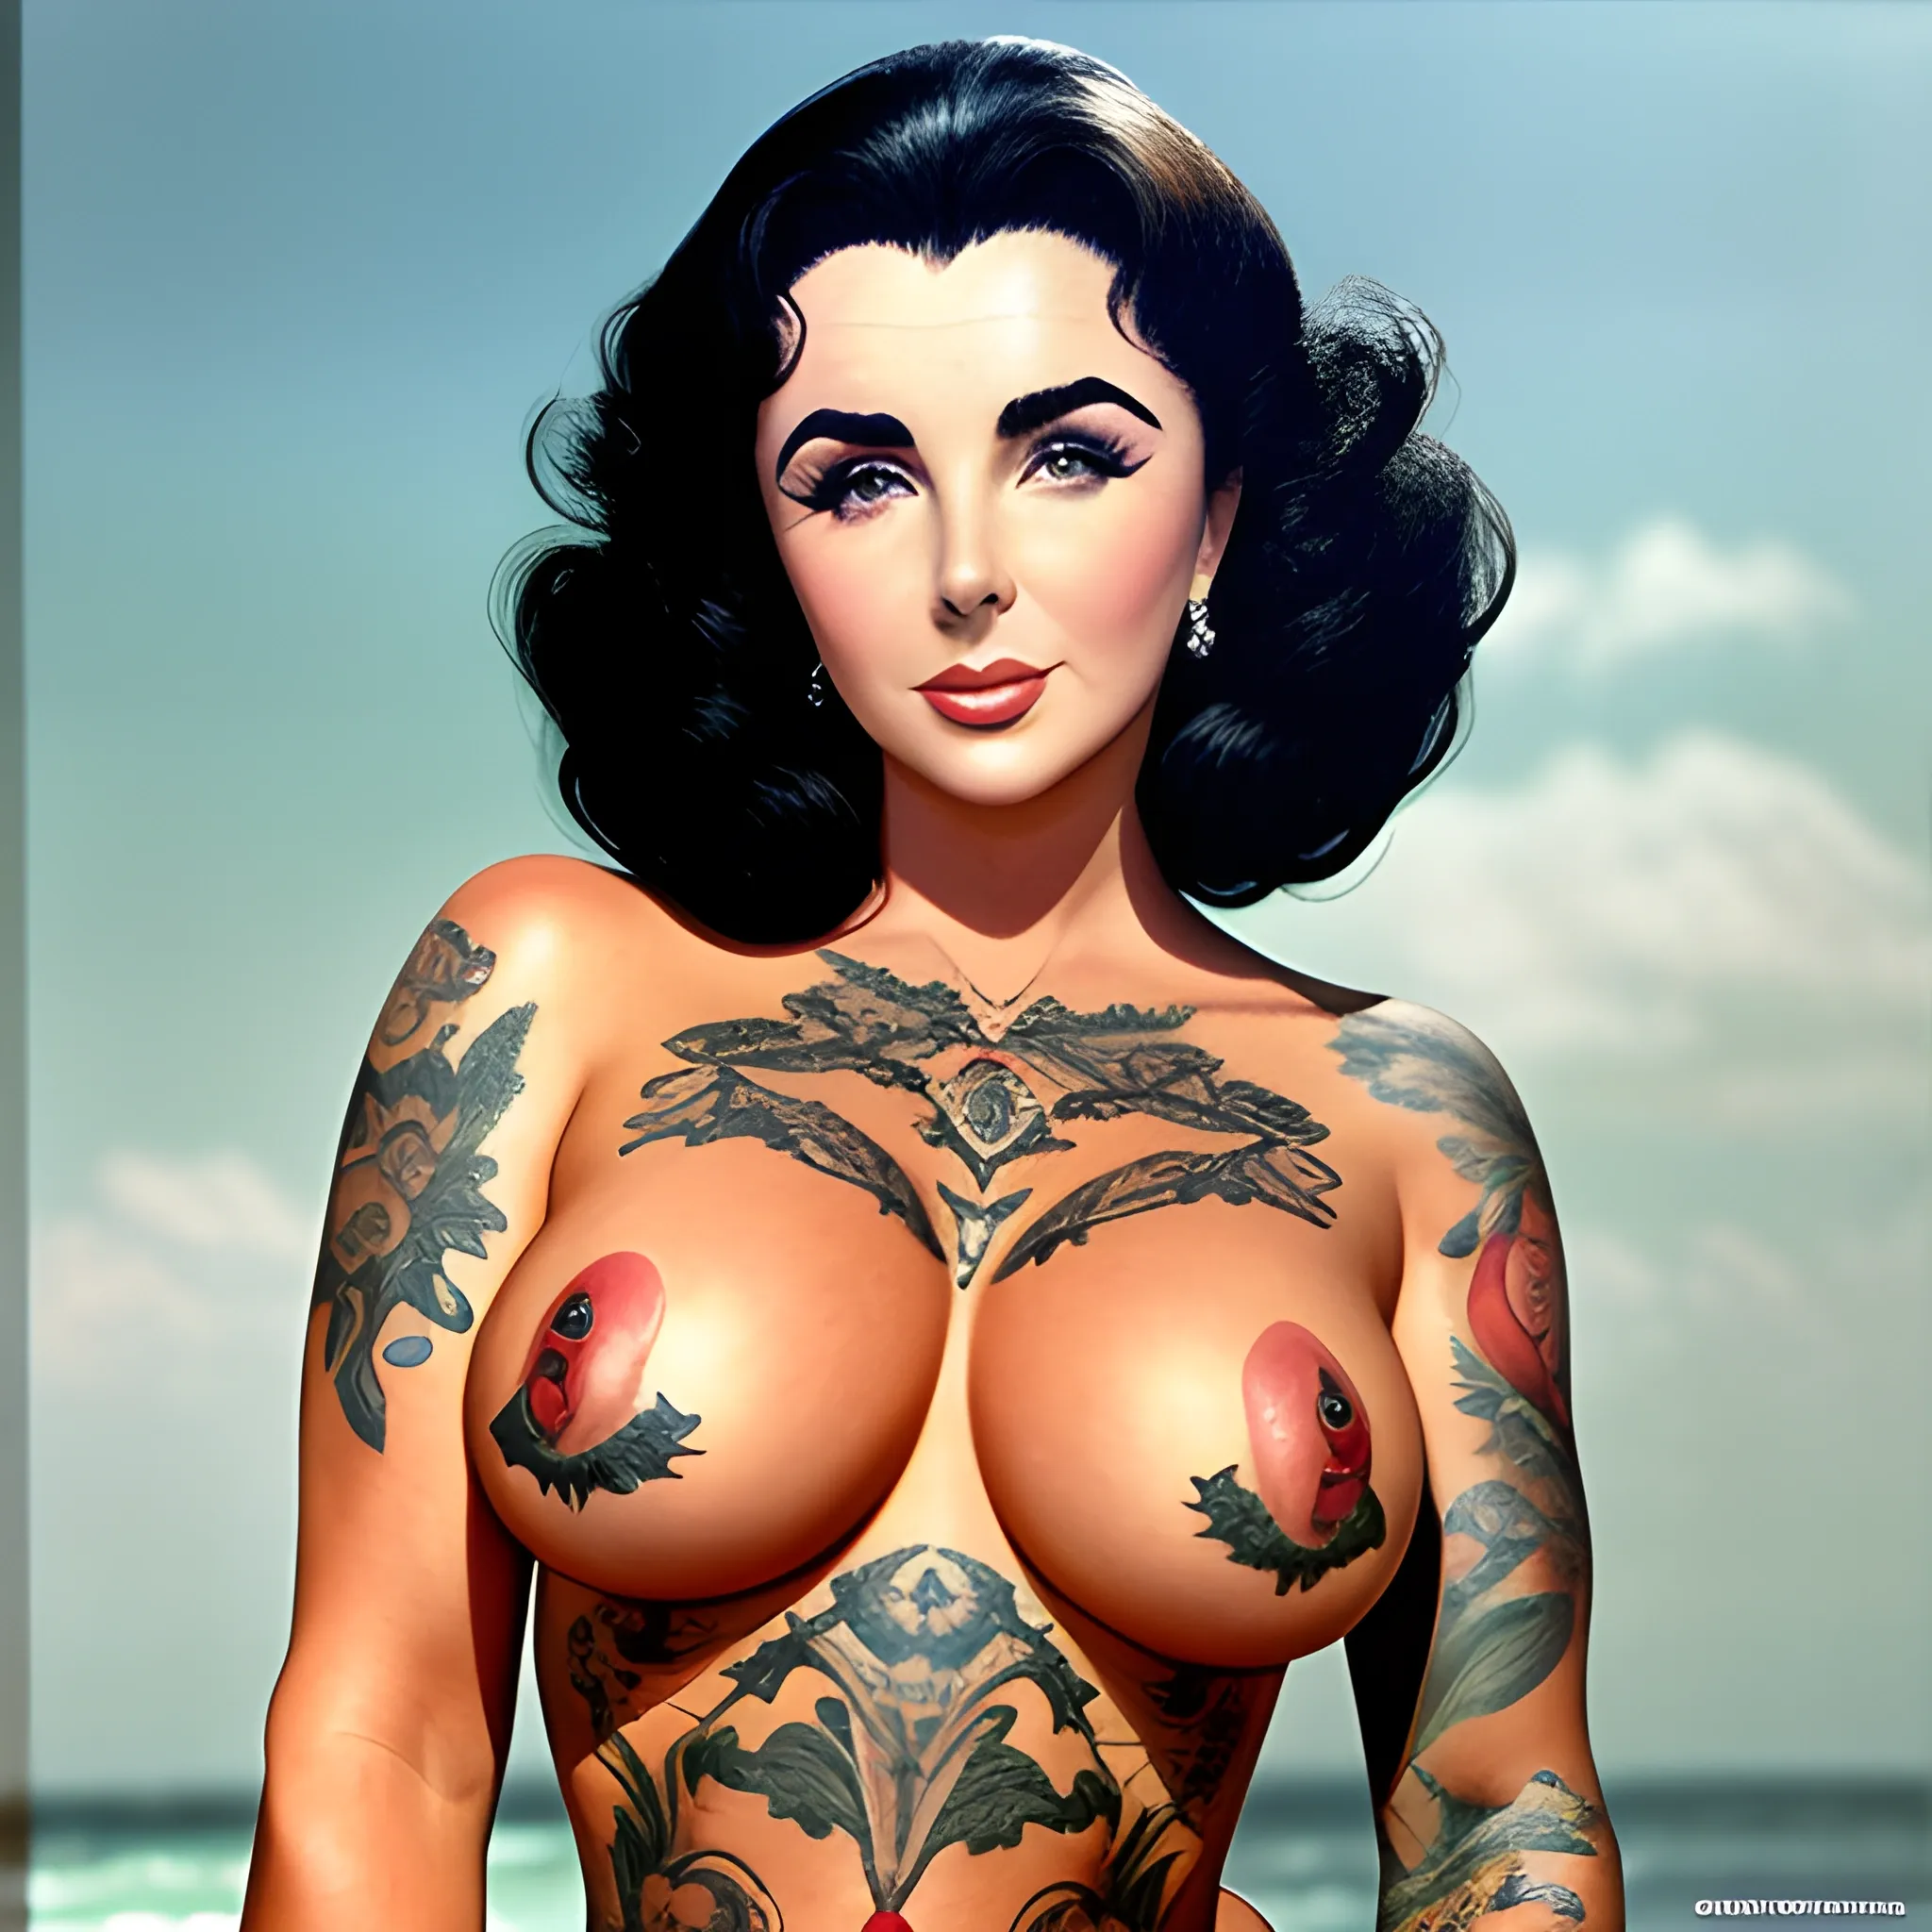 Elizabeth Taylor in the present time, in her youth, who has the style of today's girls , tattoos on her body. realistic ultra-detailed, full body shot and beautiful face, professional photography